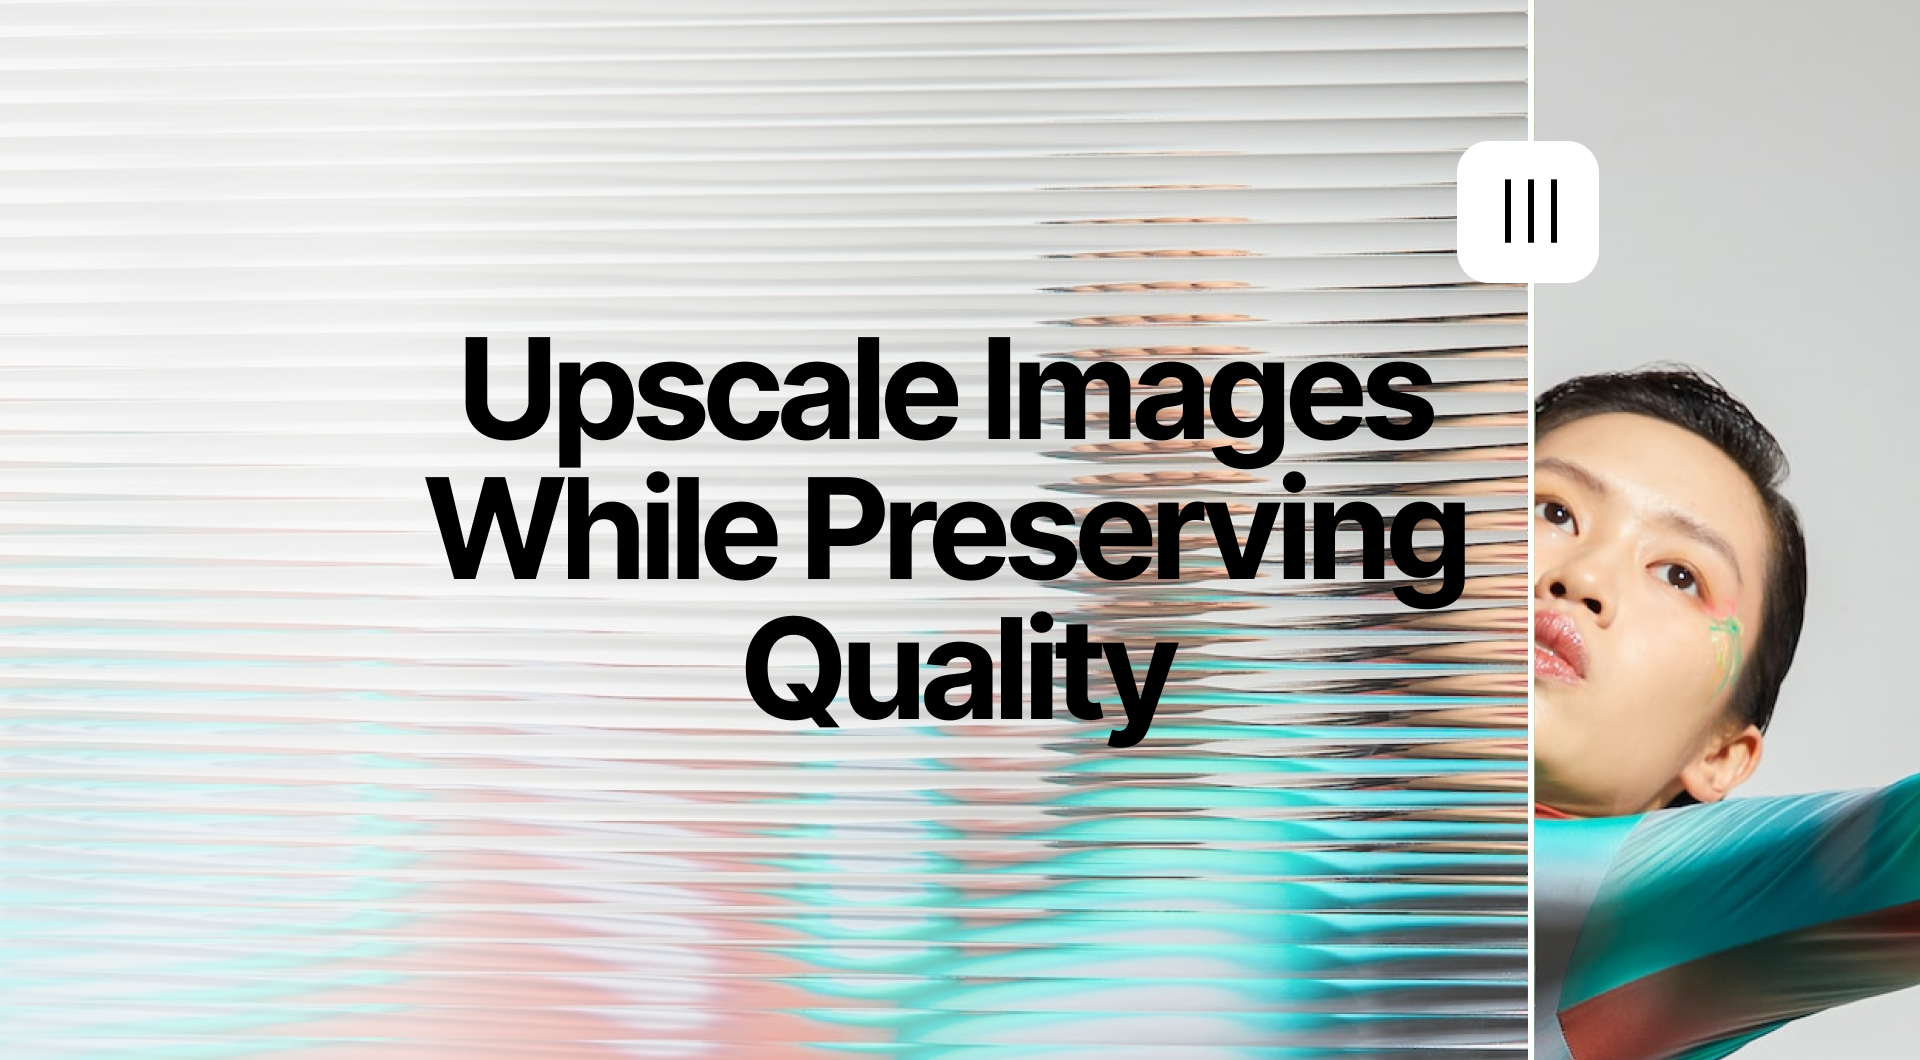 How to Upscale Images Without Losing Quality